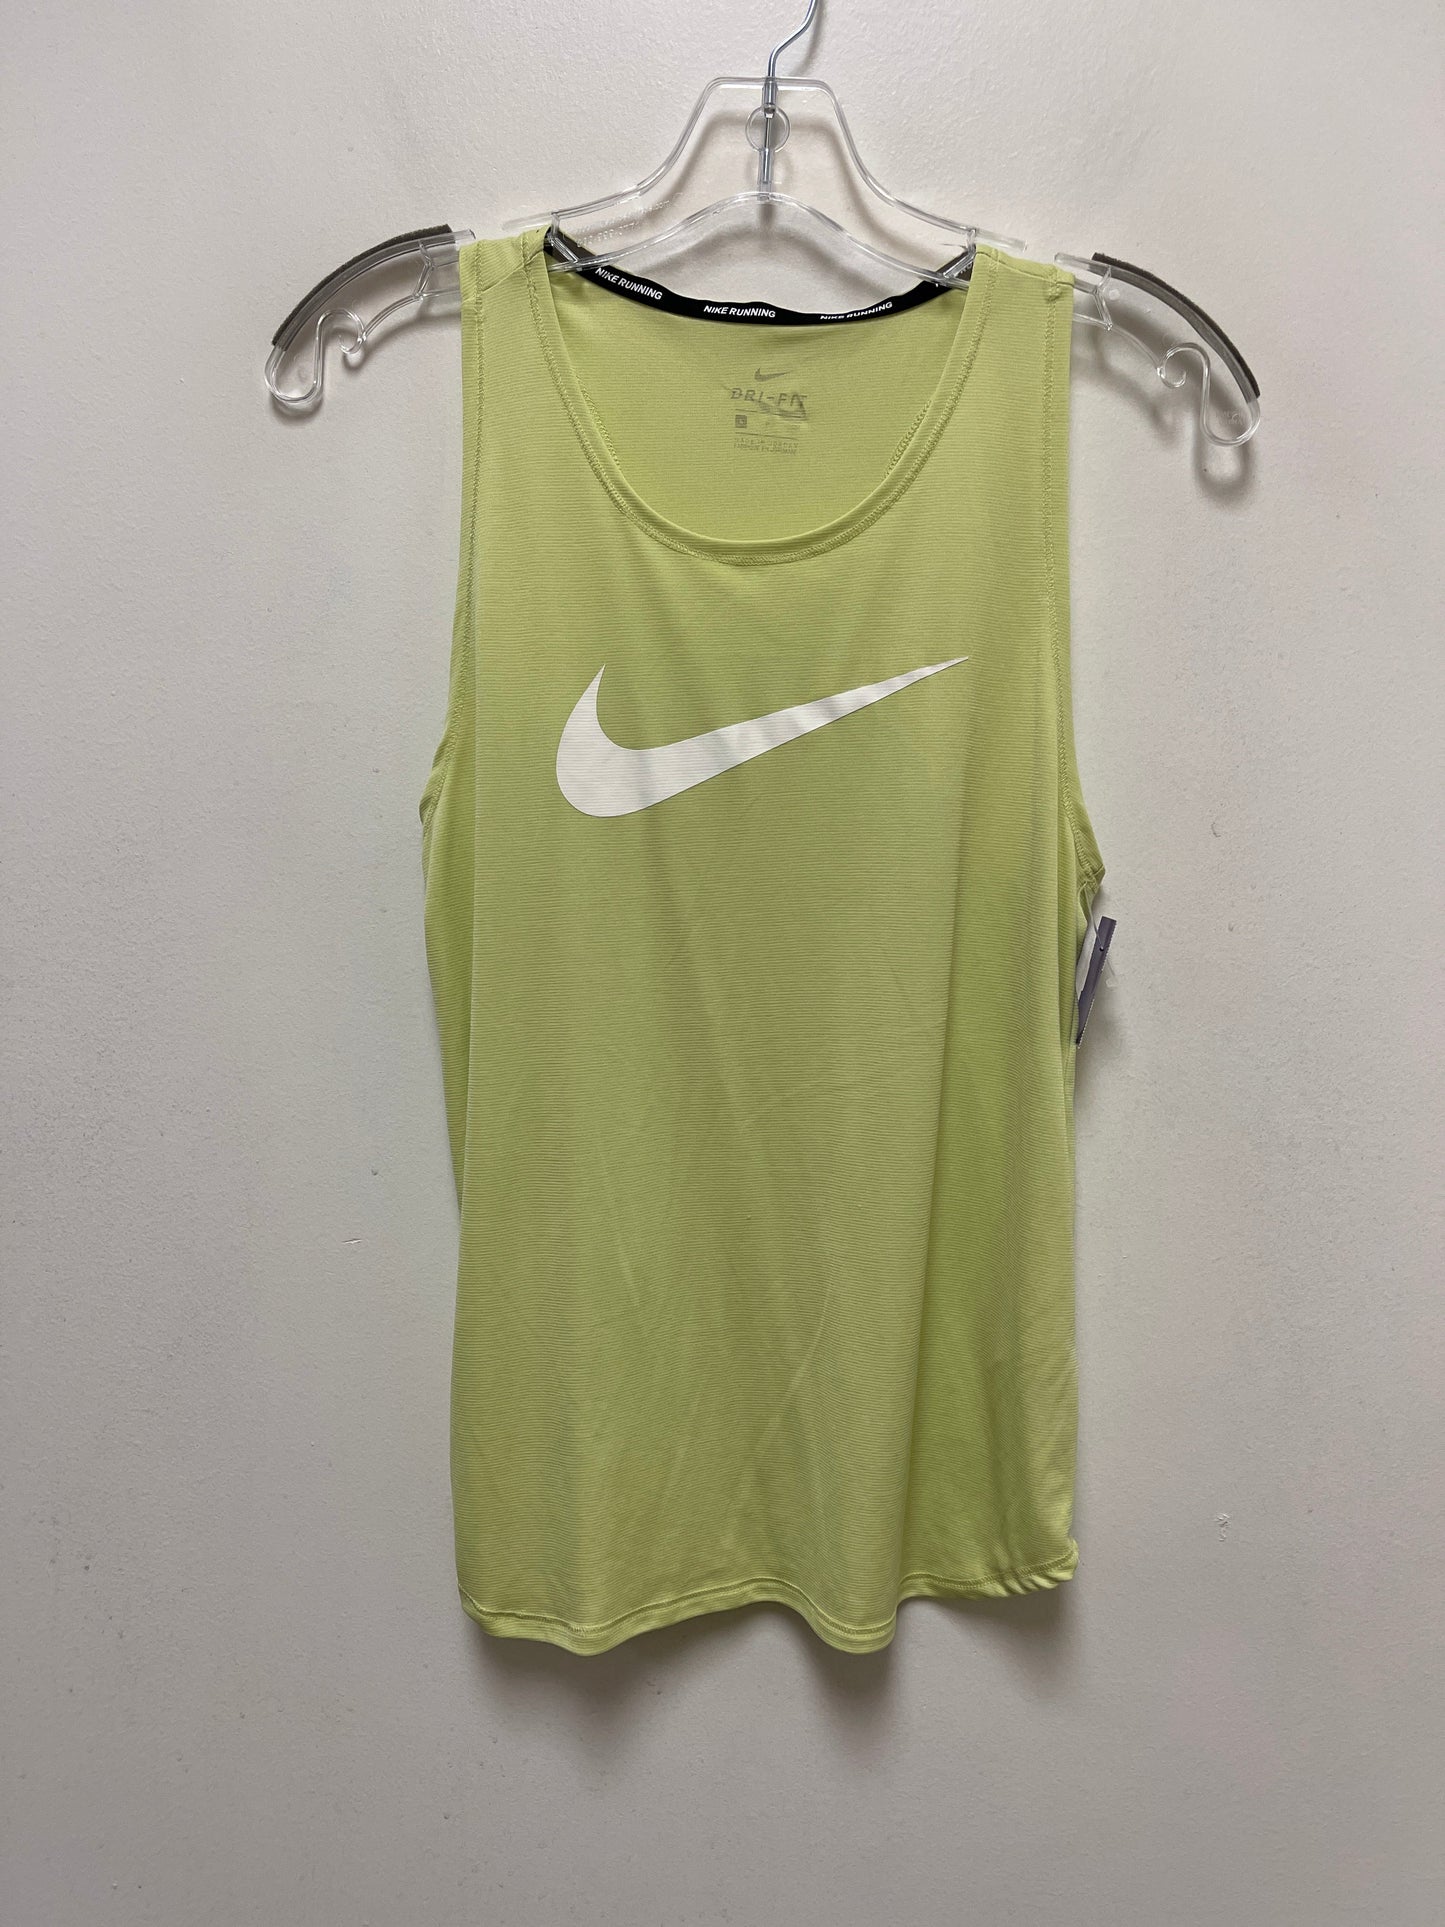 Yellow Athletic Tank Top Nike Apparel, Size S